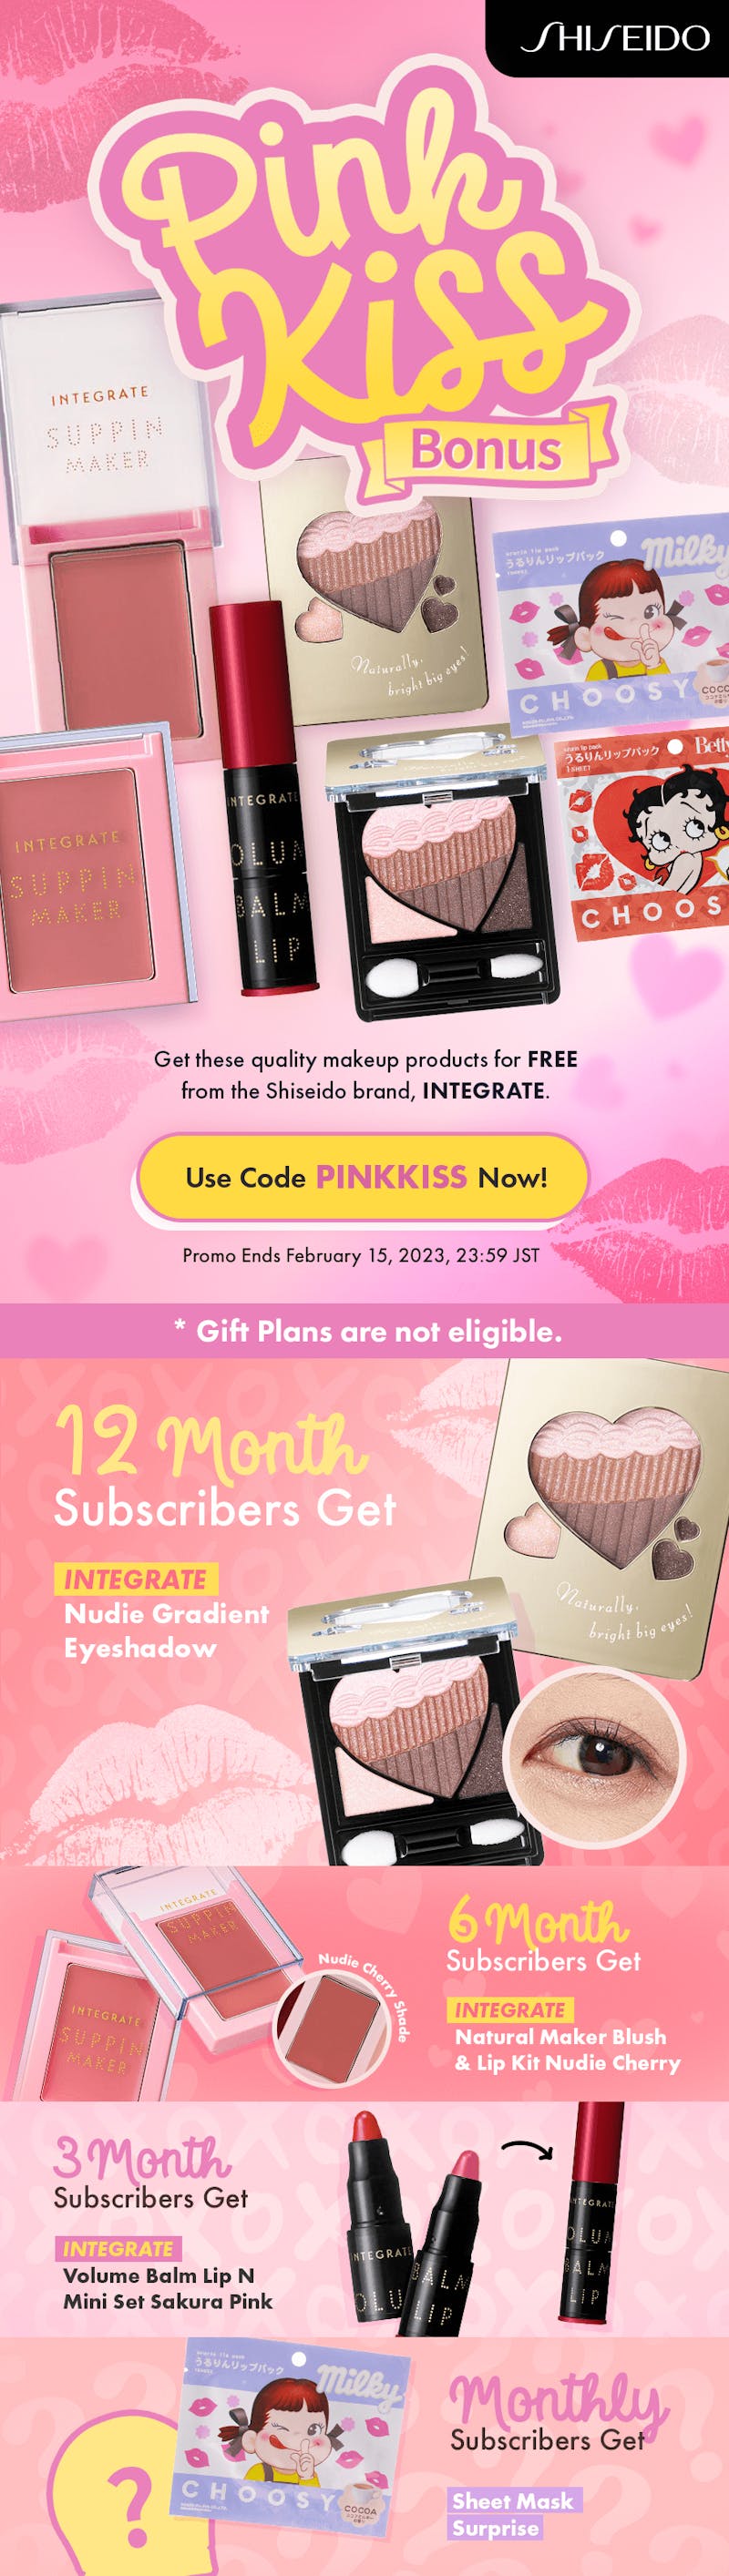 nomakenolife's Pink Kiss Bonus promotion that features pink makeup from Shiseido brand INTEGRATE